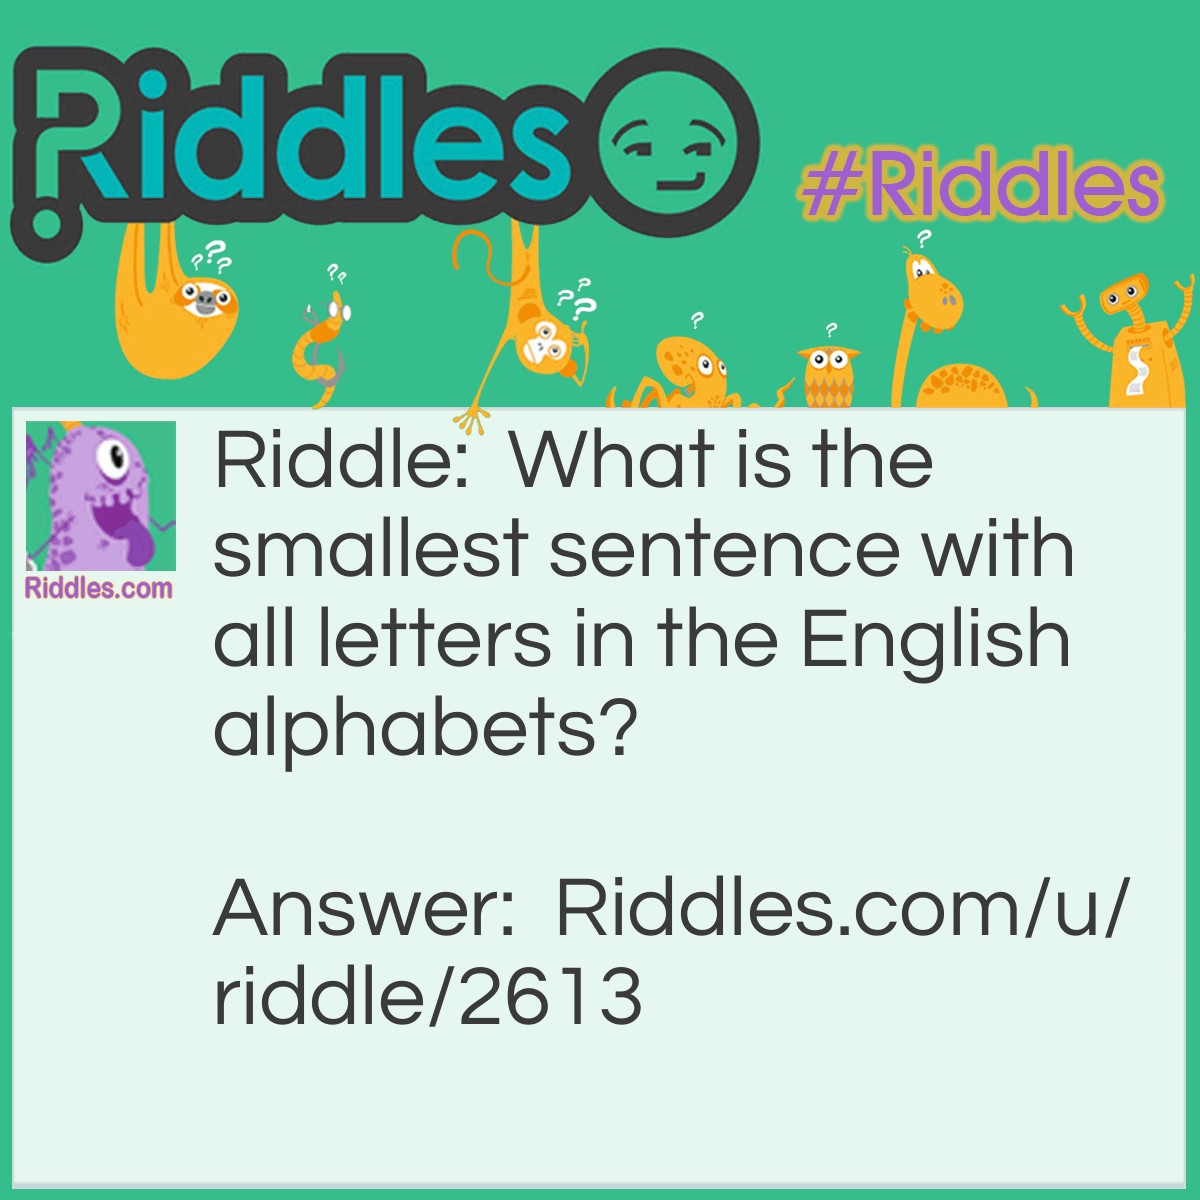 Riddle: What is the smallest sentence with all letters in the English alphabet? Answer: The quick brown fox jumps over the lazy dog.